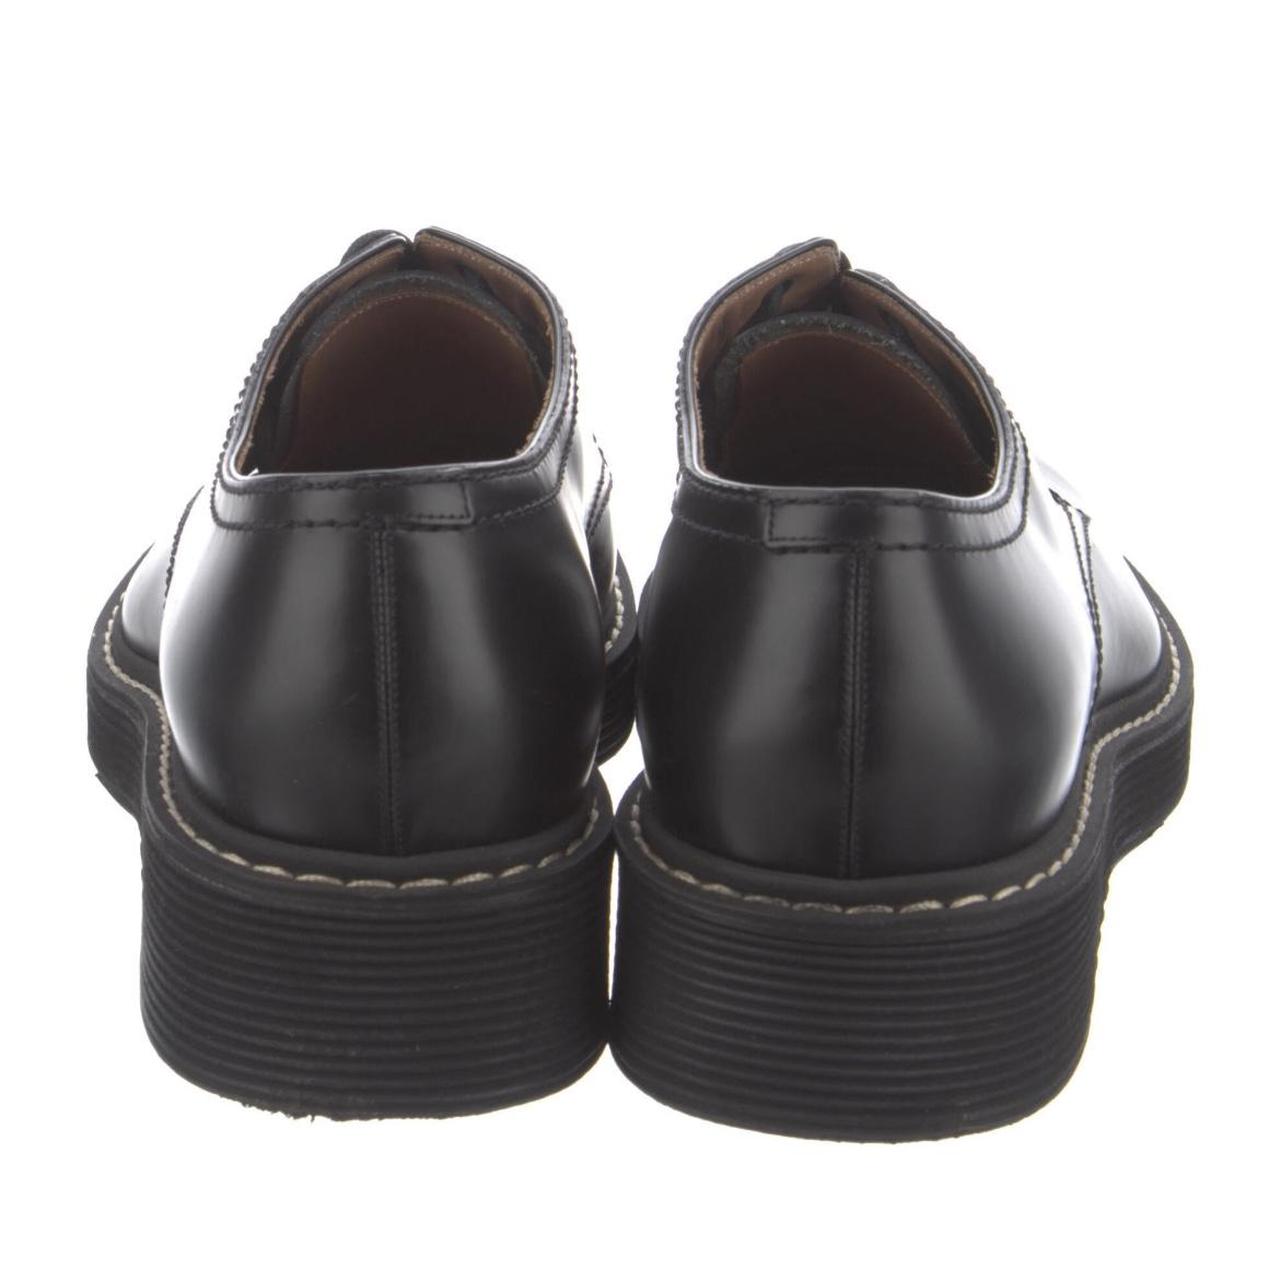 Product Image 2 - marni leather derby shoes
great condition
size: